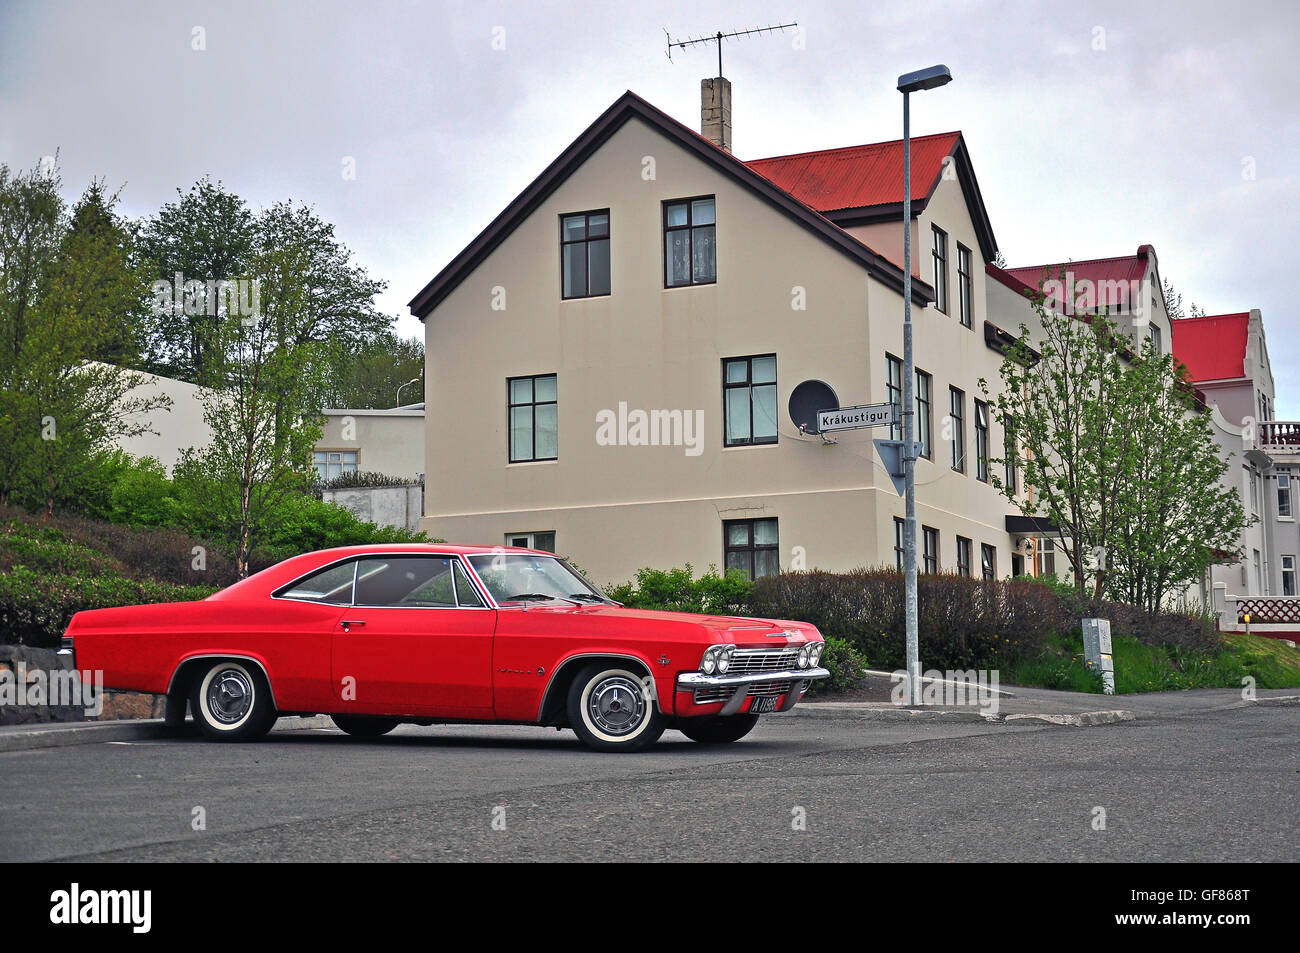 AKUREYRI, ICELAND - JUNE 4: The red old fashioned car parked in the street of Akureyri on June 4, 2013. Akureyri is the second l Stock Photo